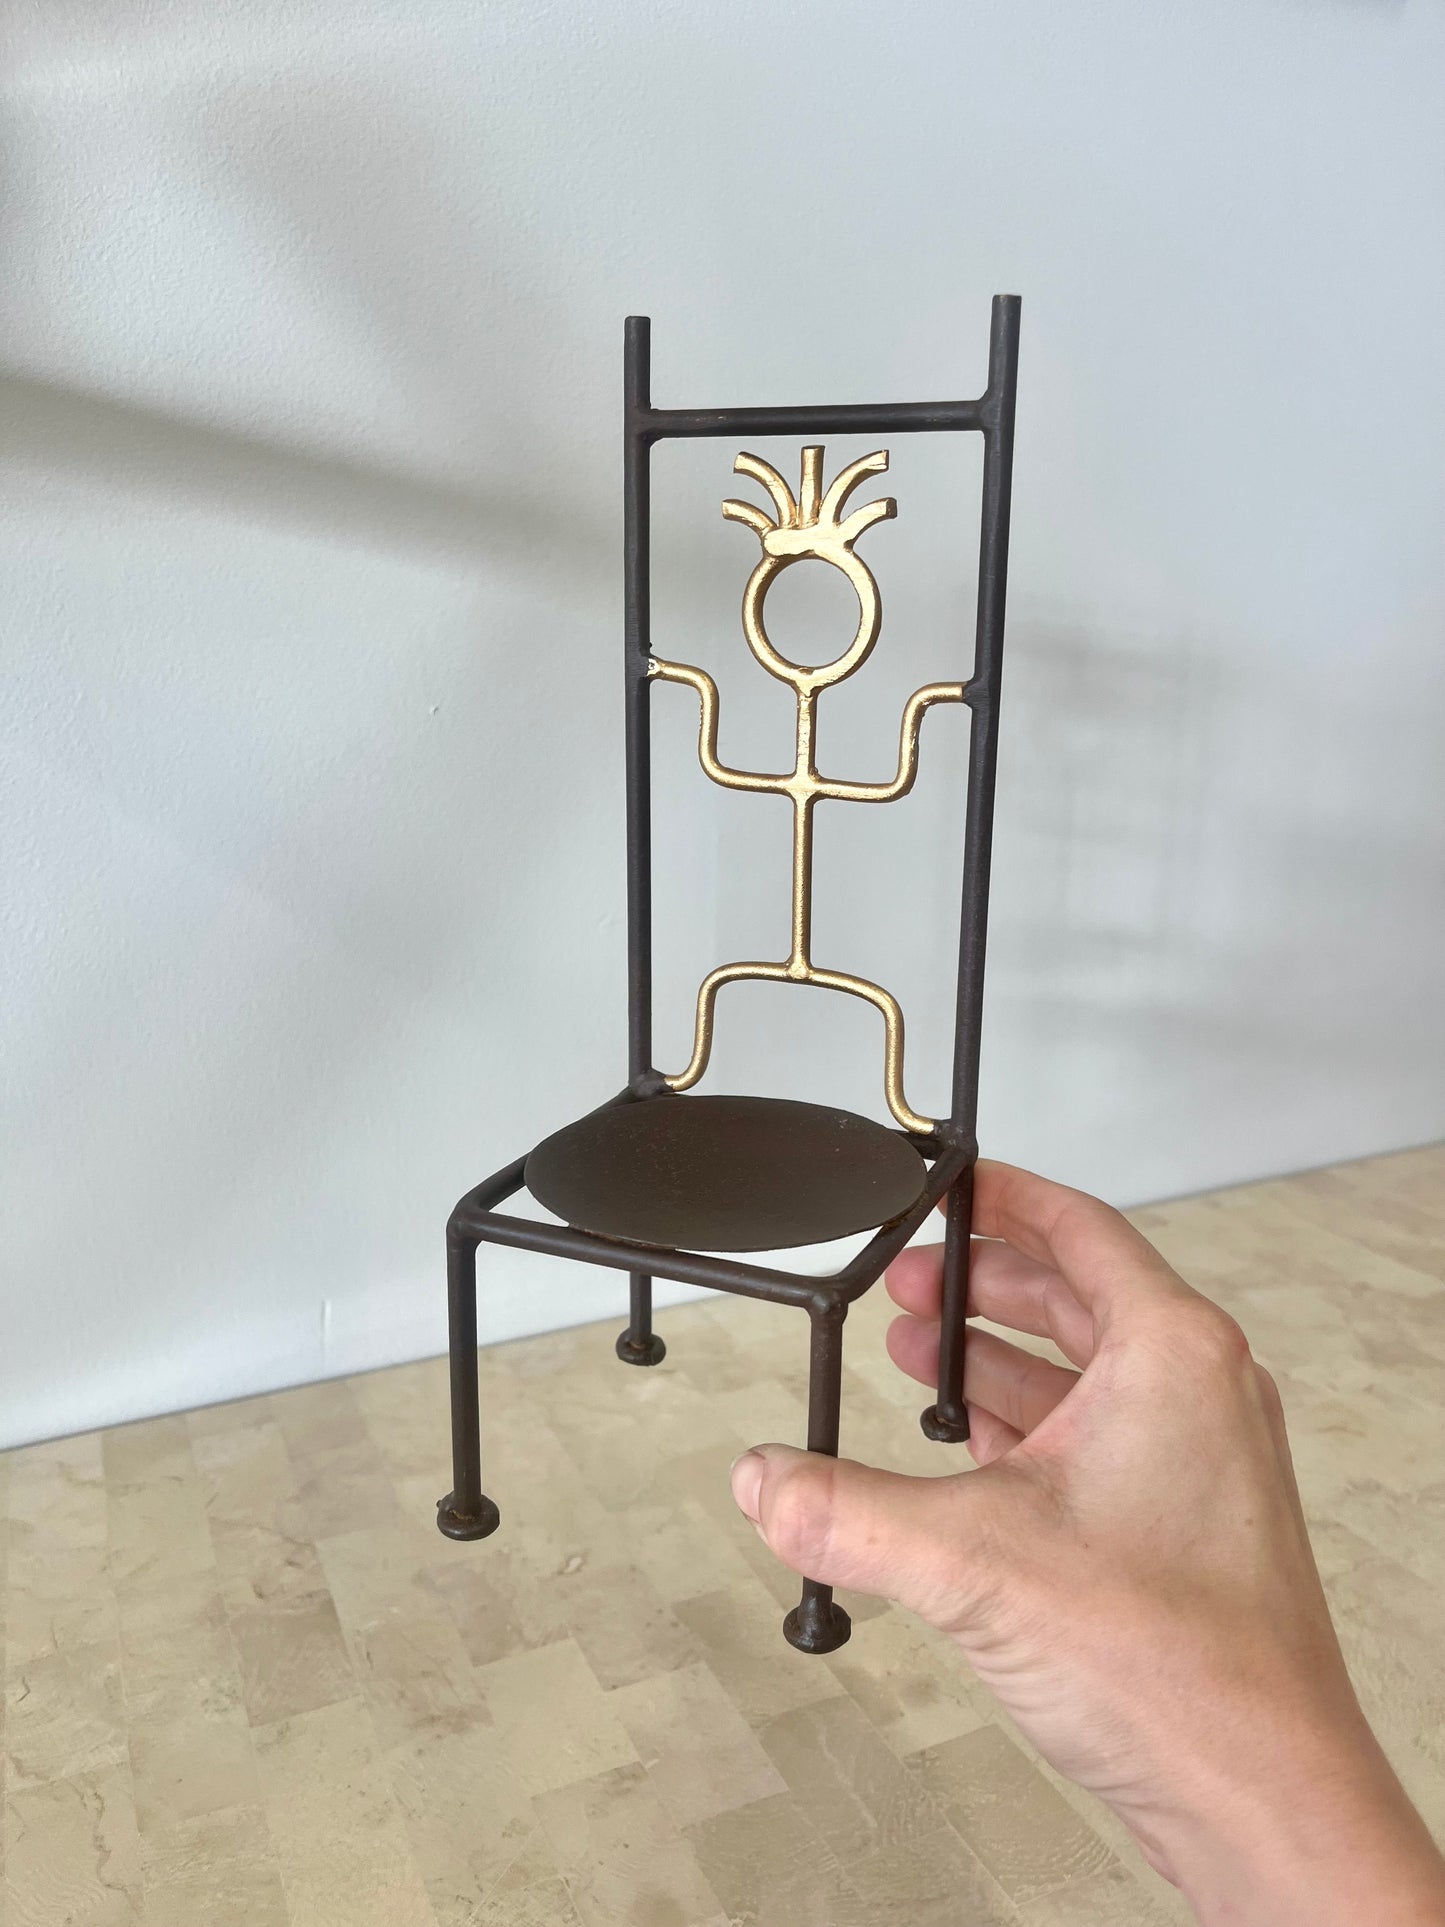 Postmodern Laurids Lonborg Style Iron Chair Candle Holder